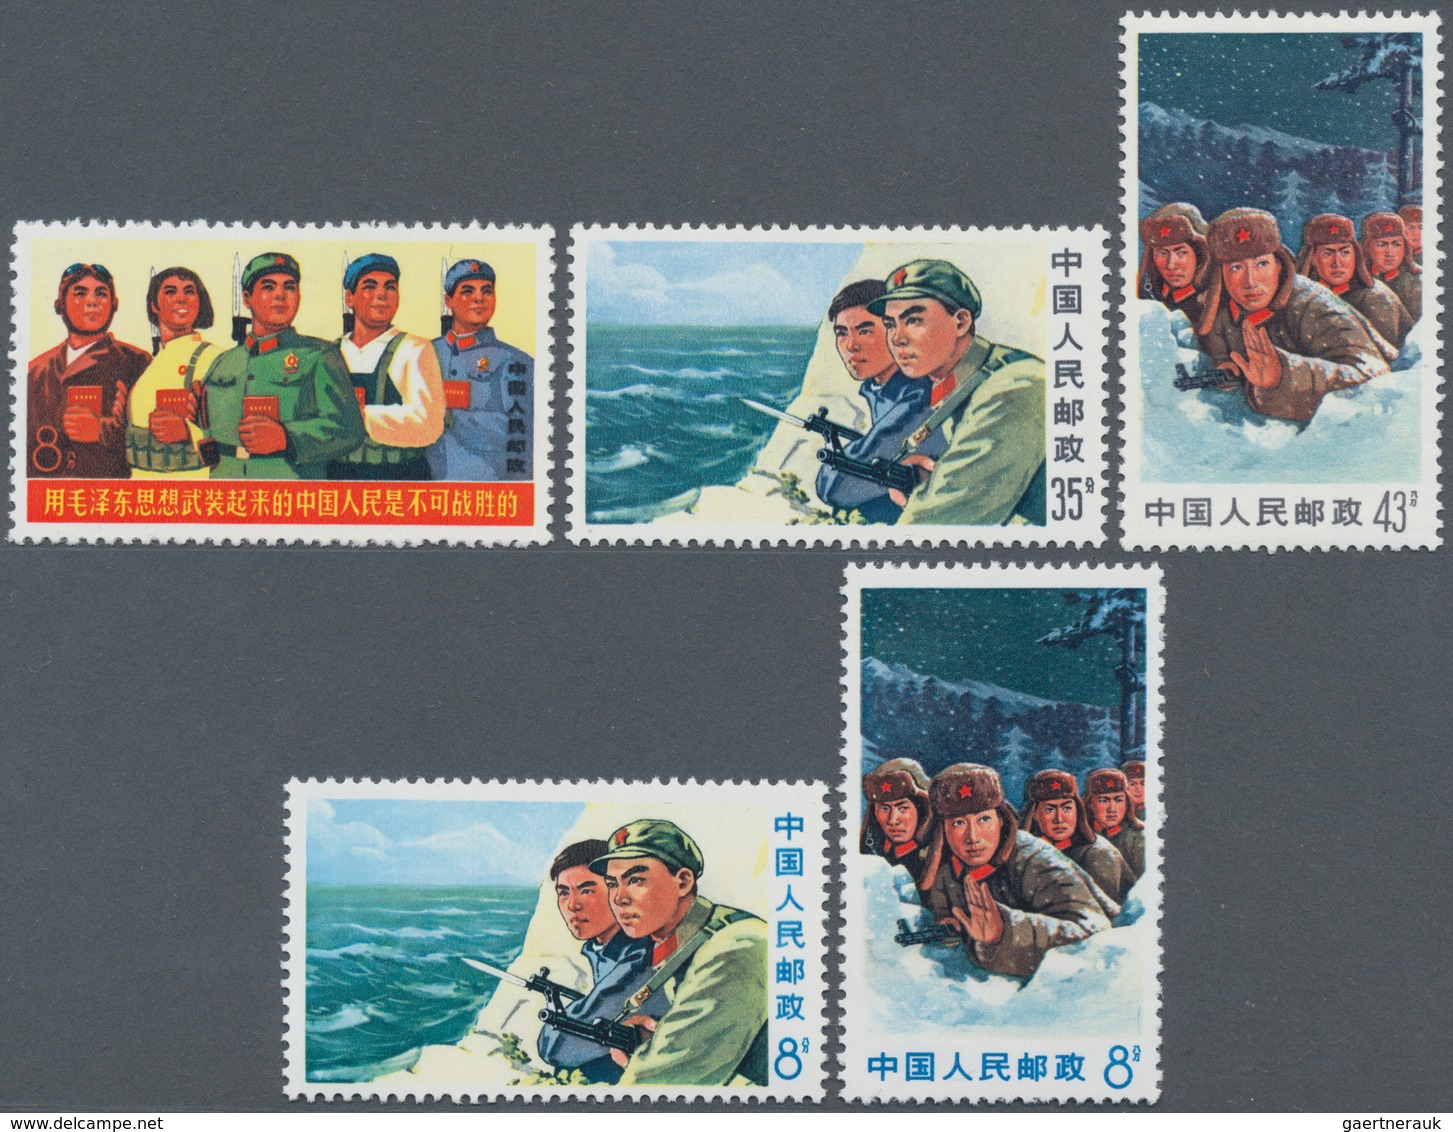 China - Volksrepublik: 1968/1971, four issues MNH: Communist Party (W15), Chinese People (W18), Oper